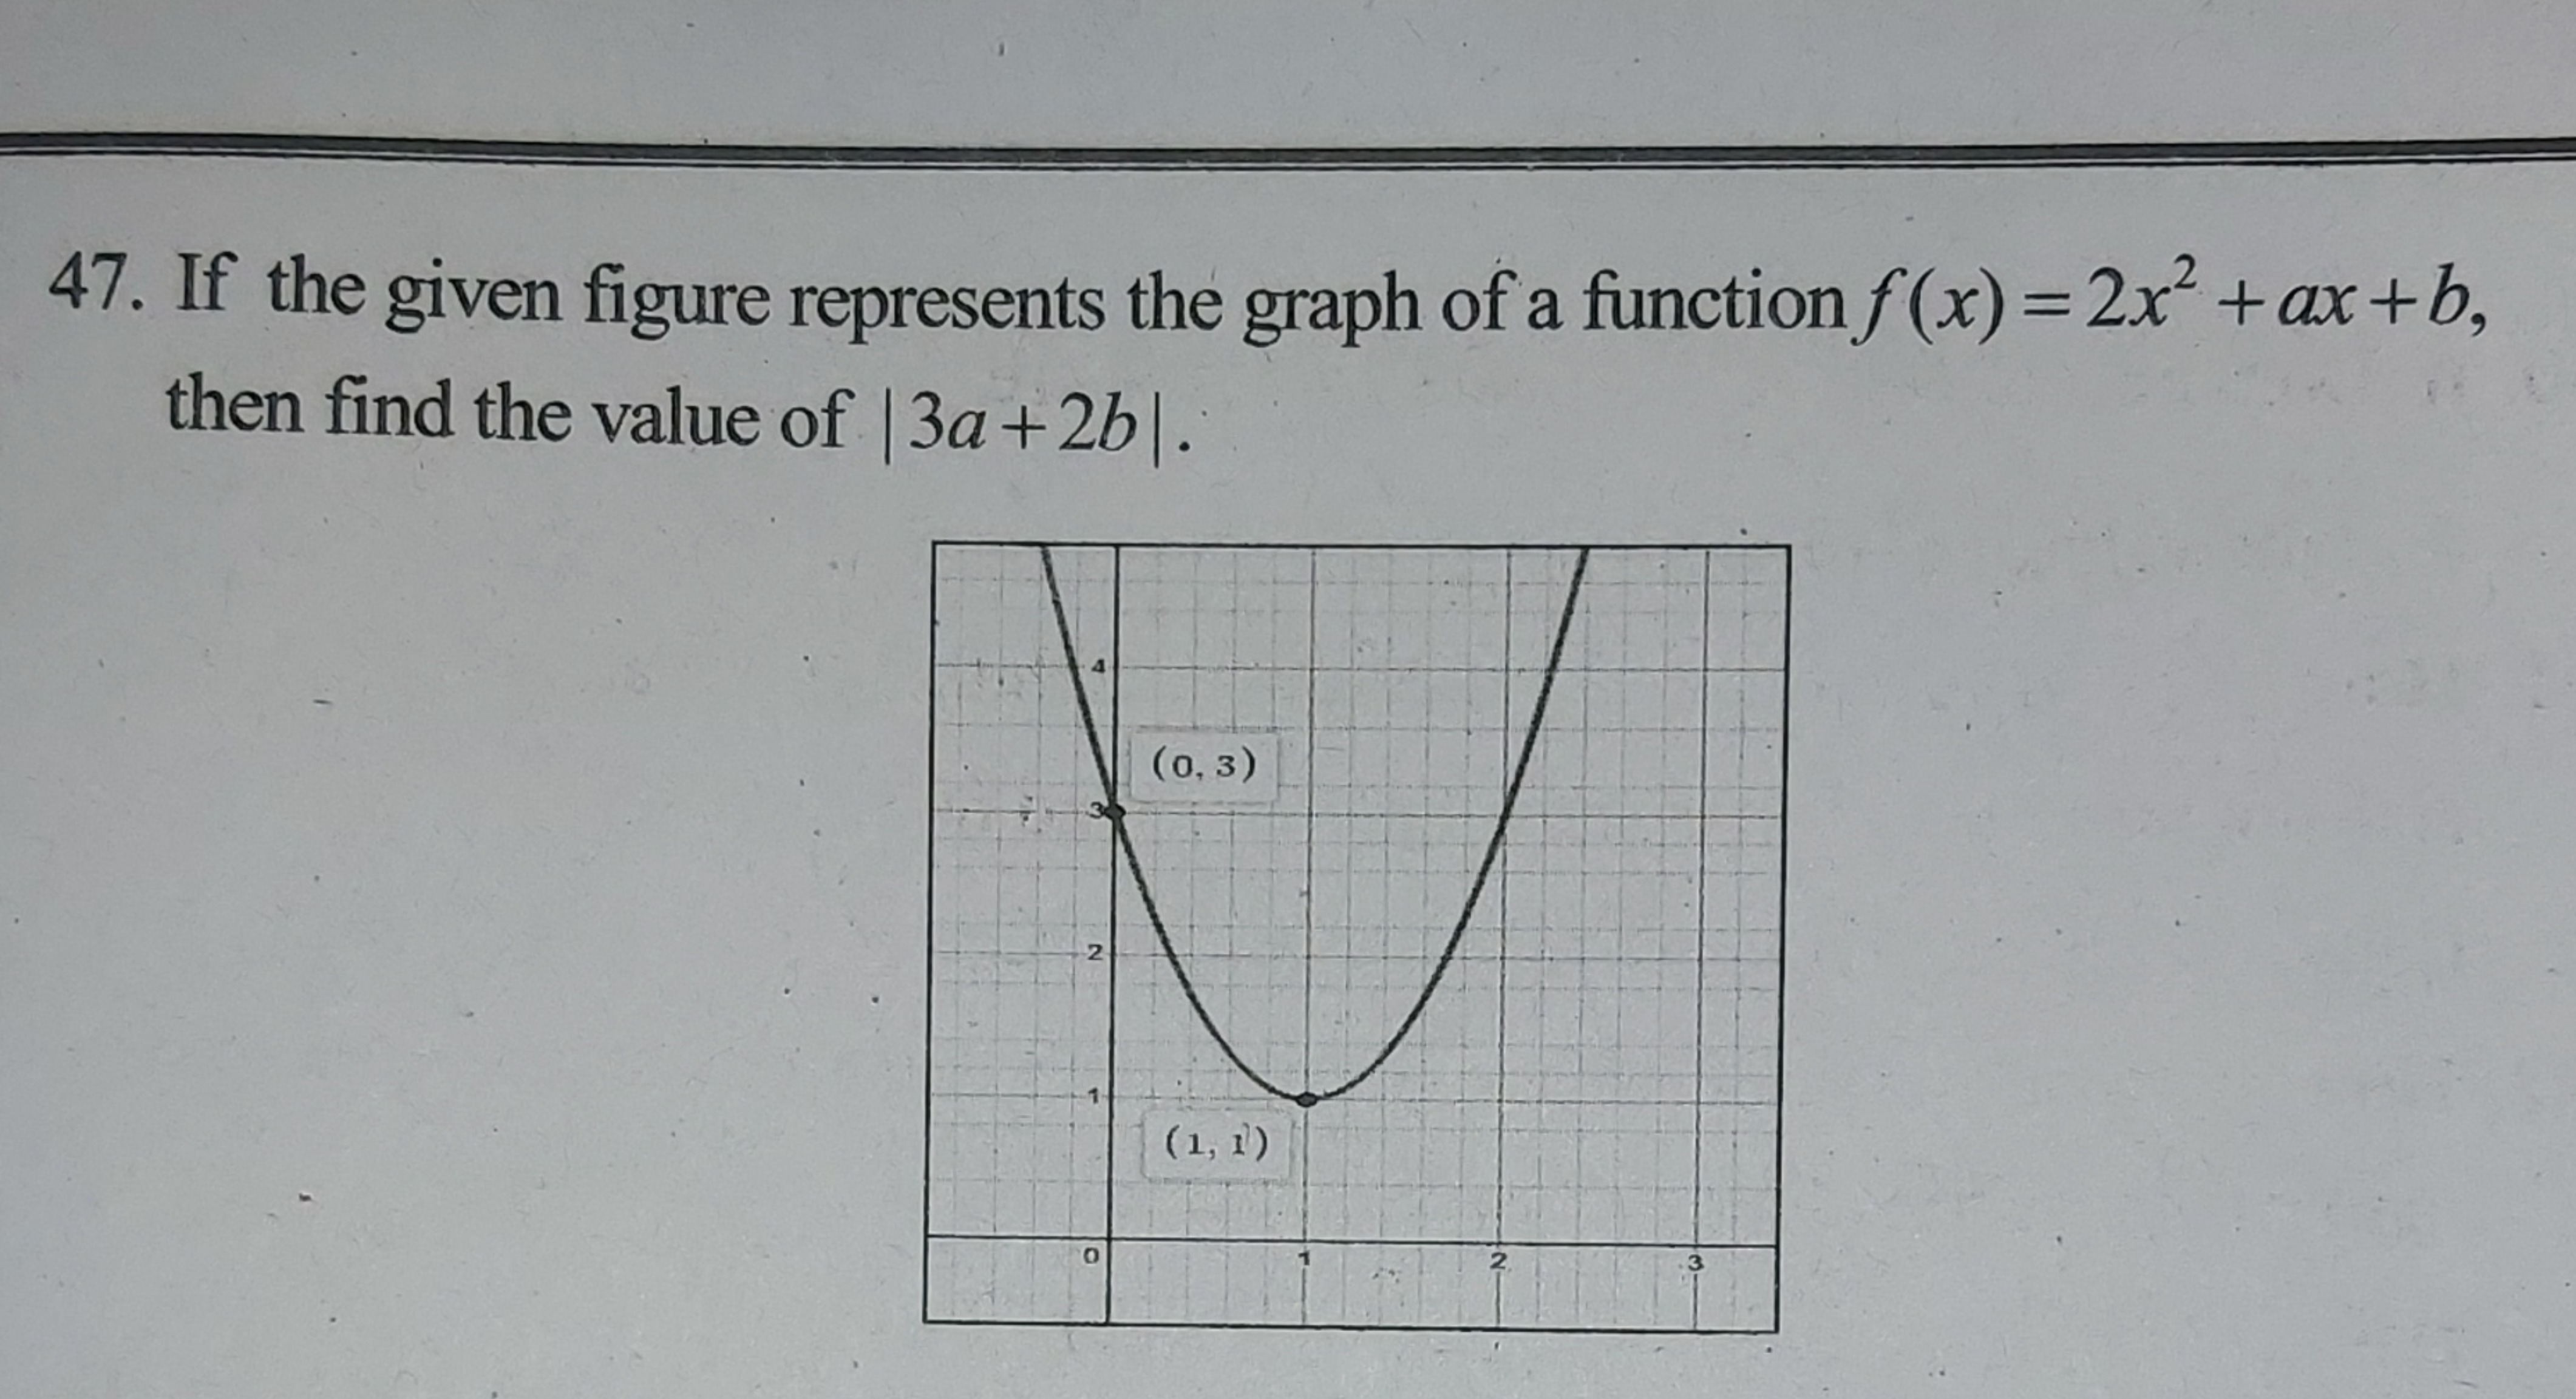 47. If the given figure represents the graph of a function f(x)=2x2+ax